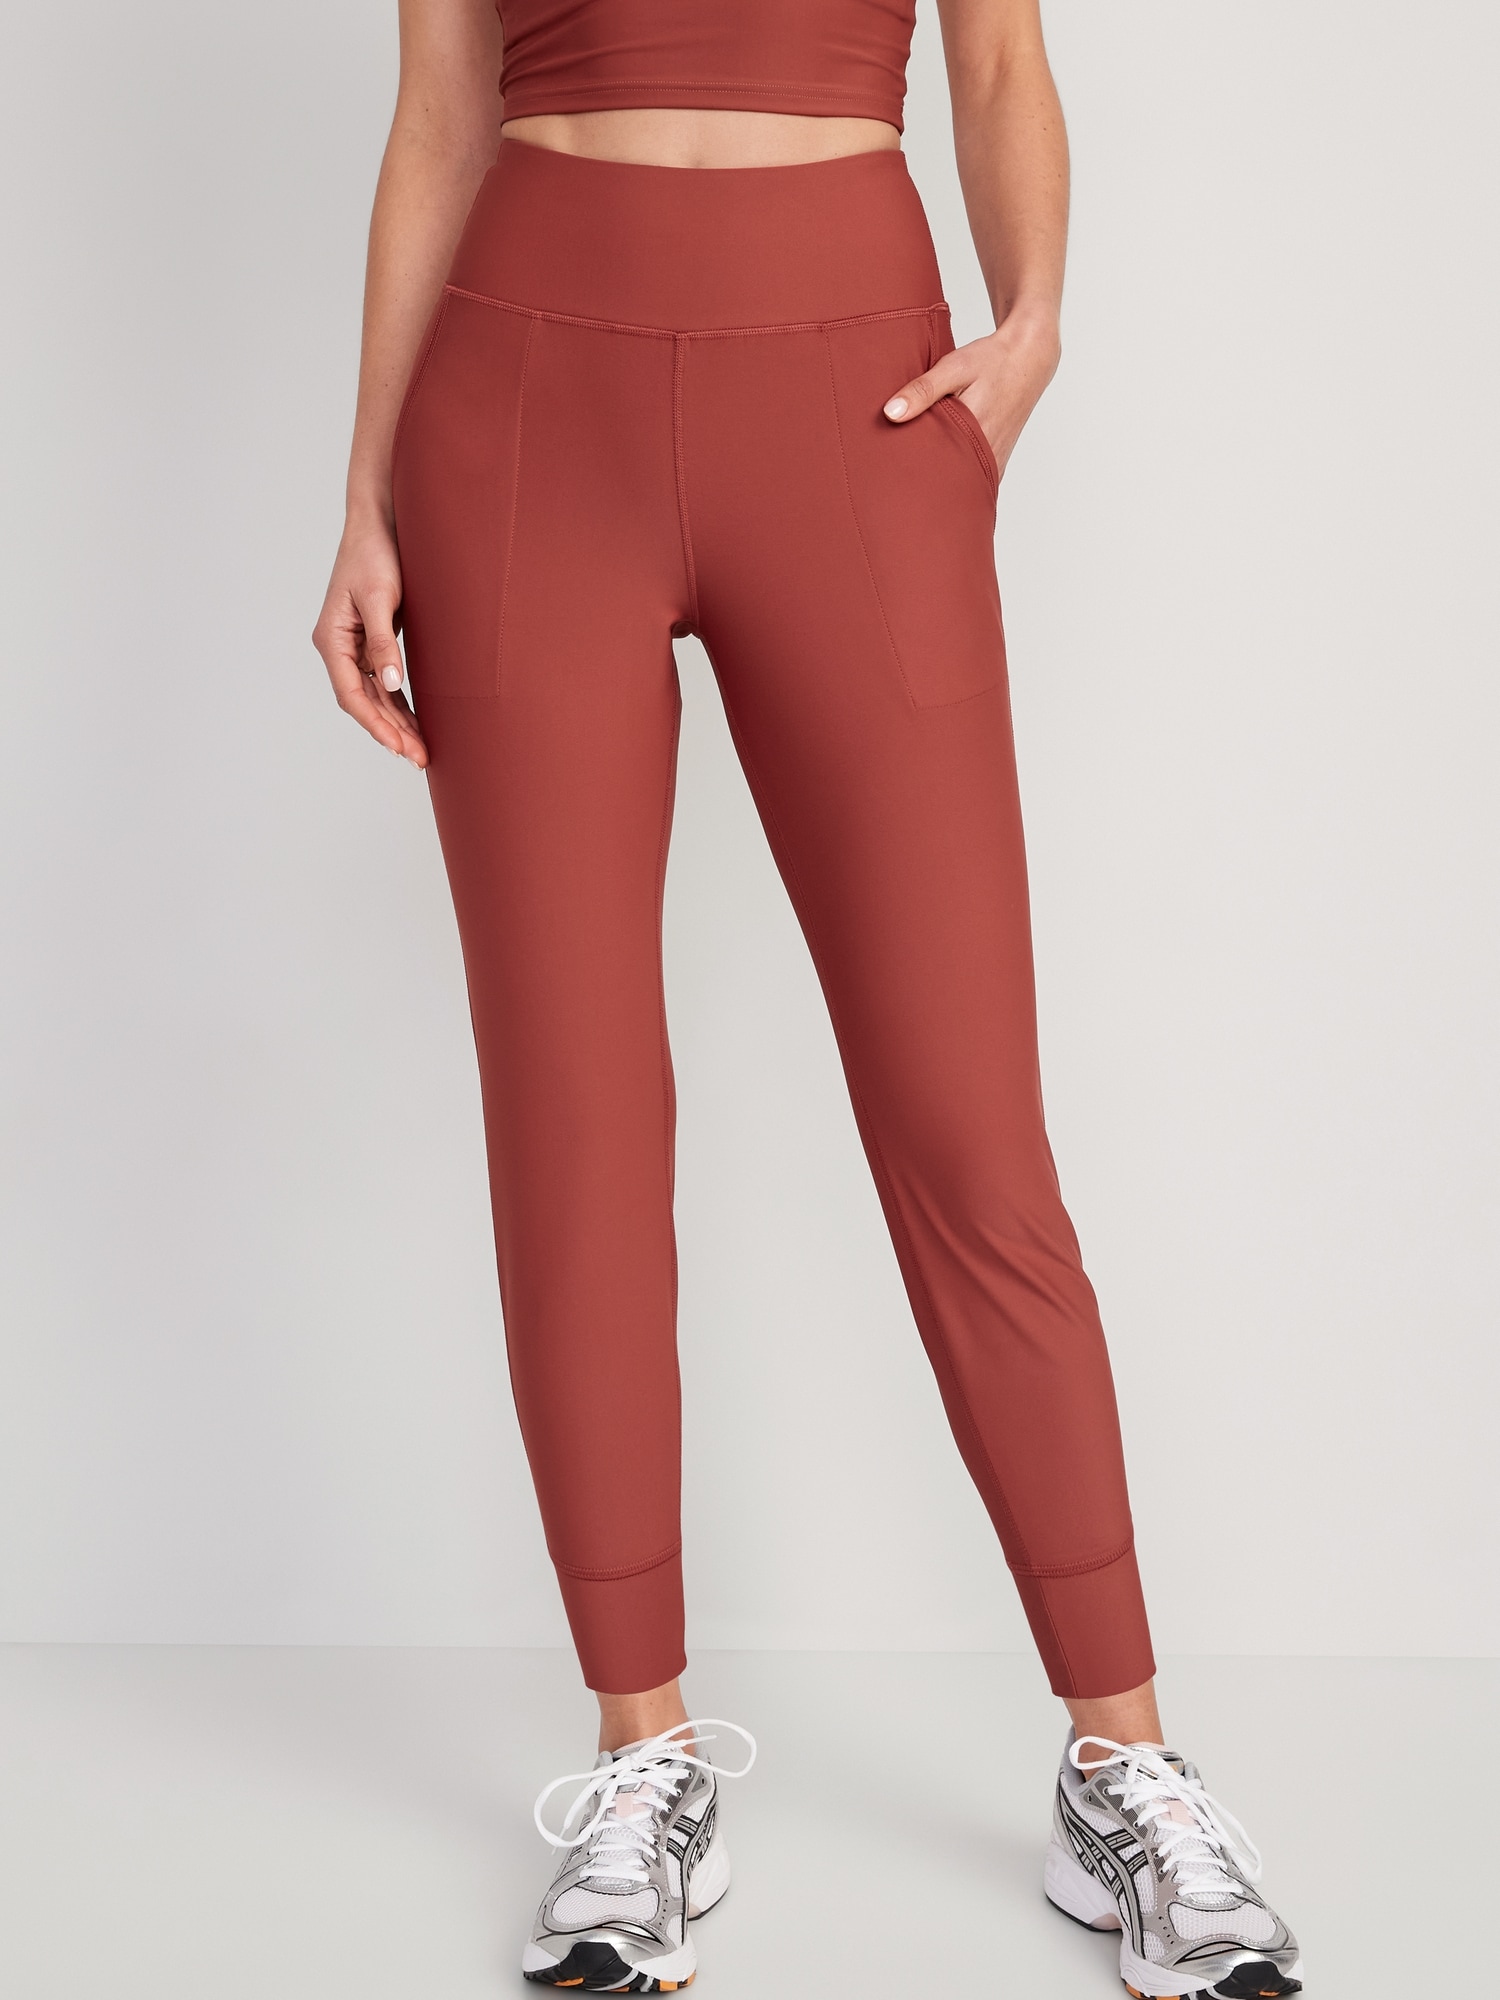  AIFHAAN Joggers for Women with Pockets Elastic Waist